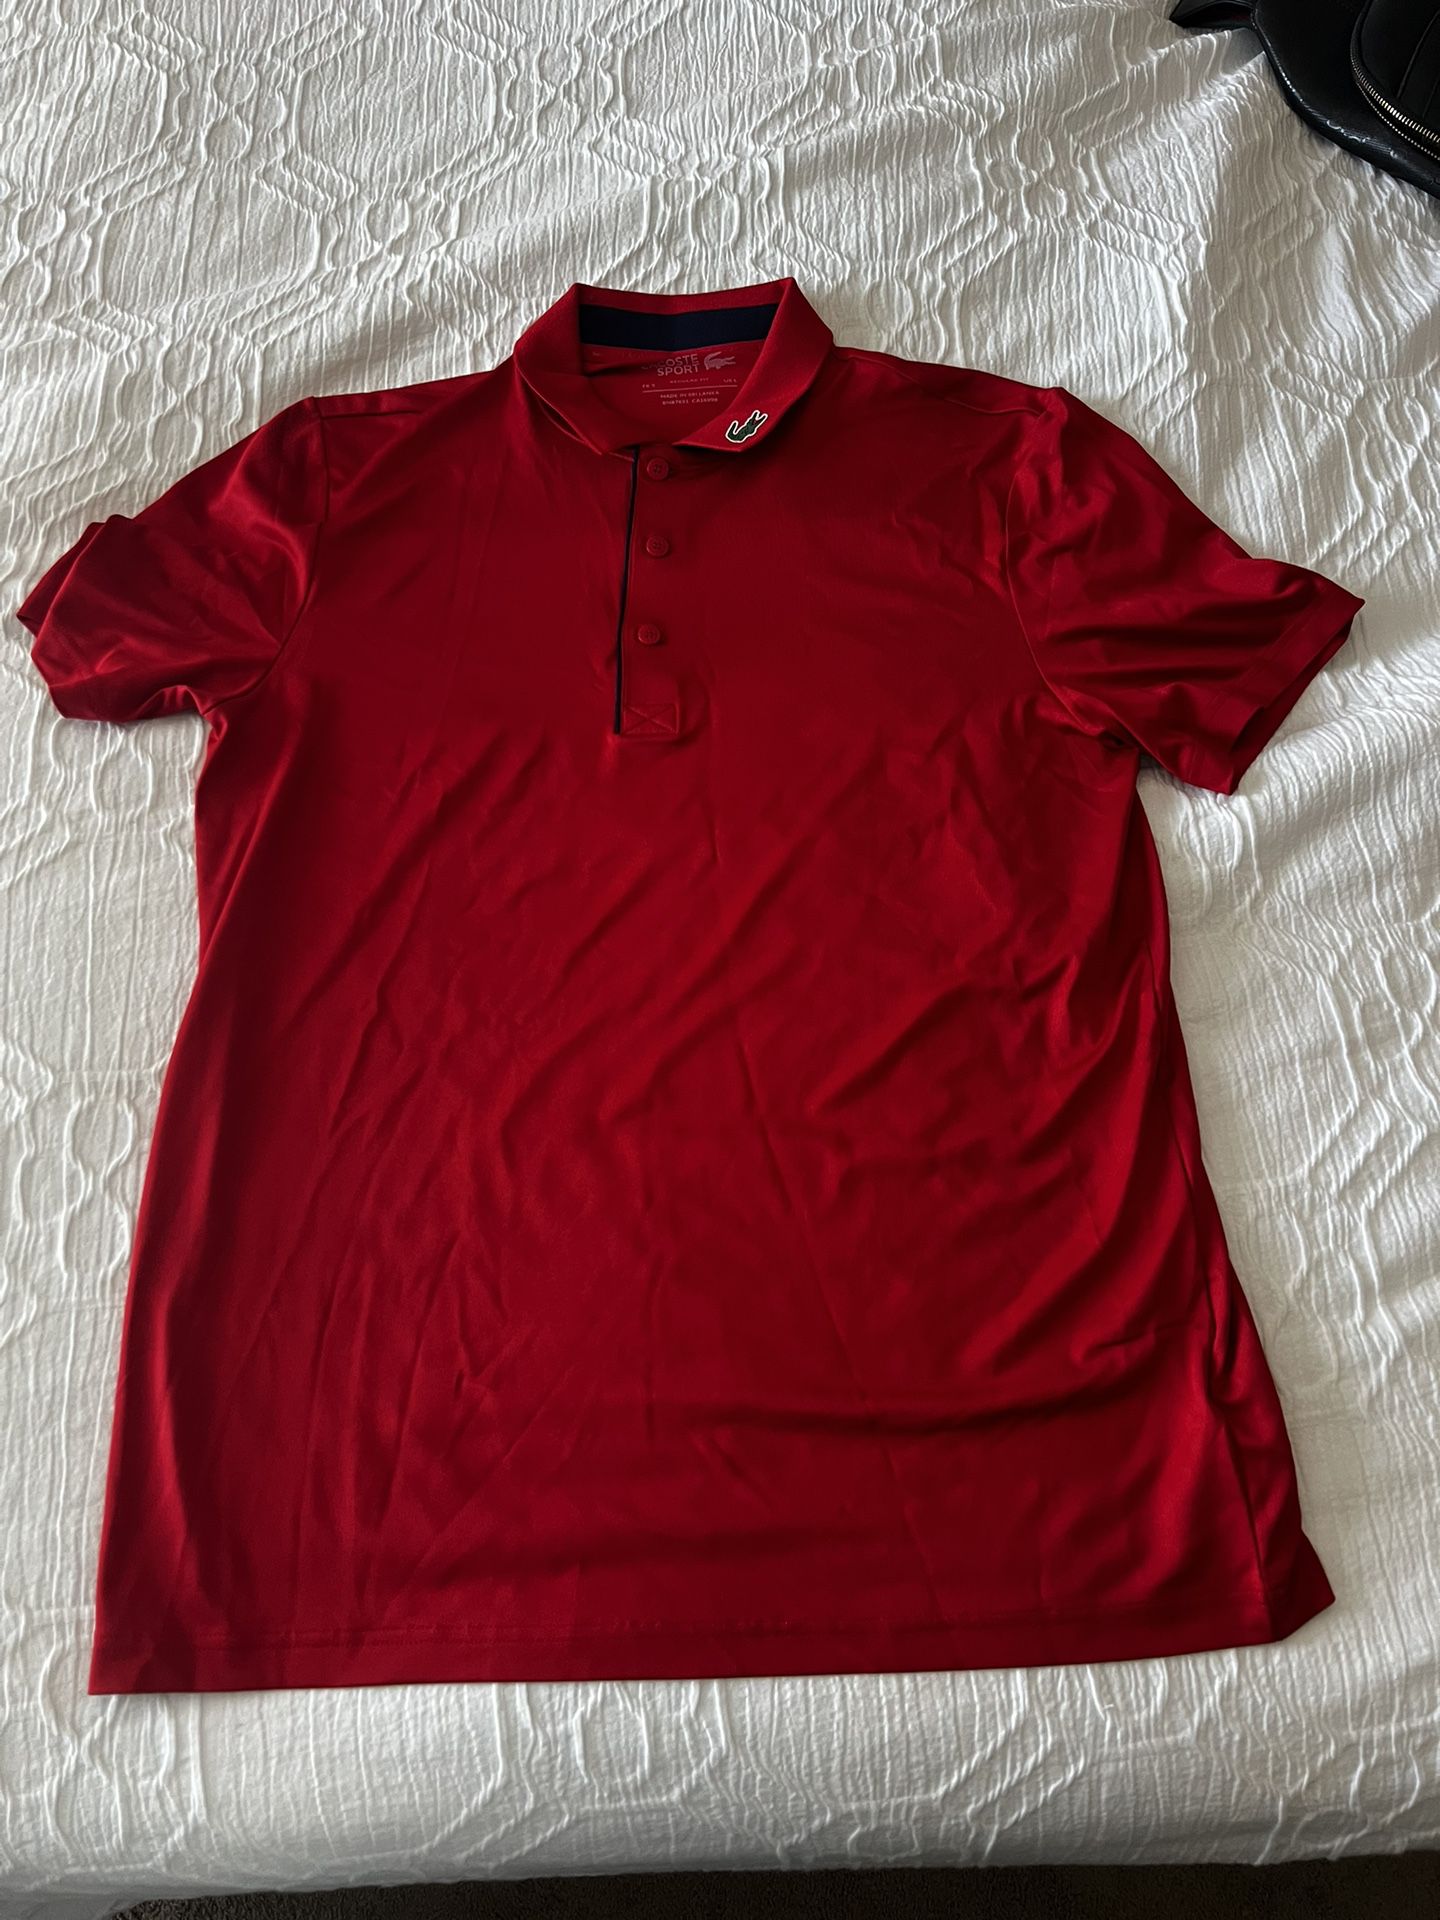 Red Lacoste Polo Shirt L